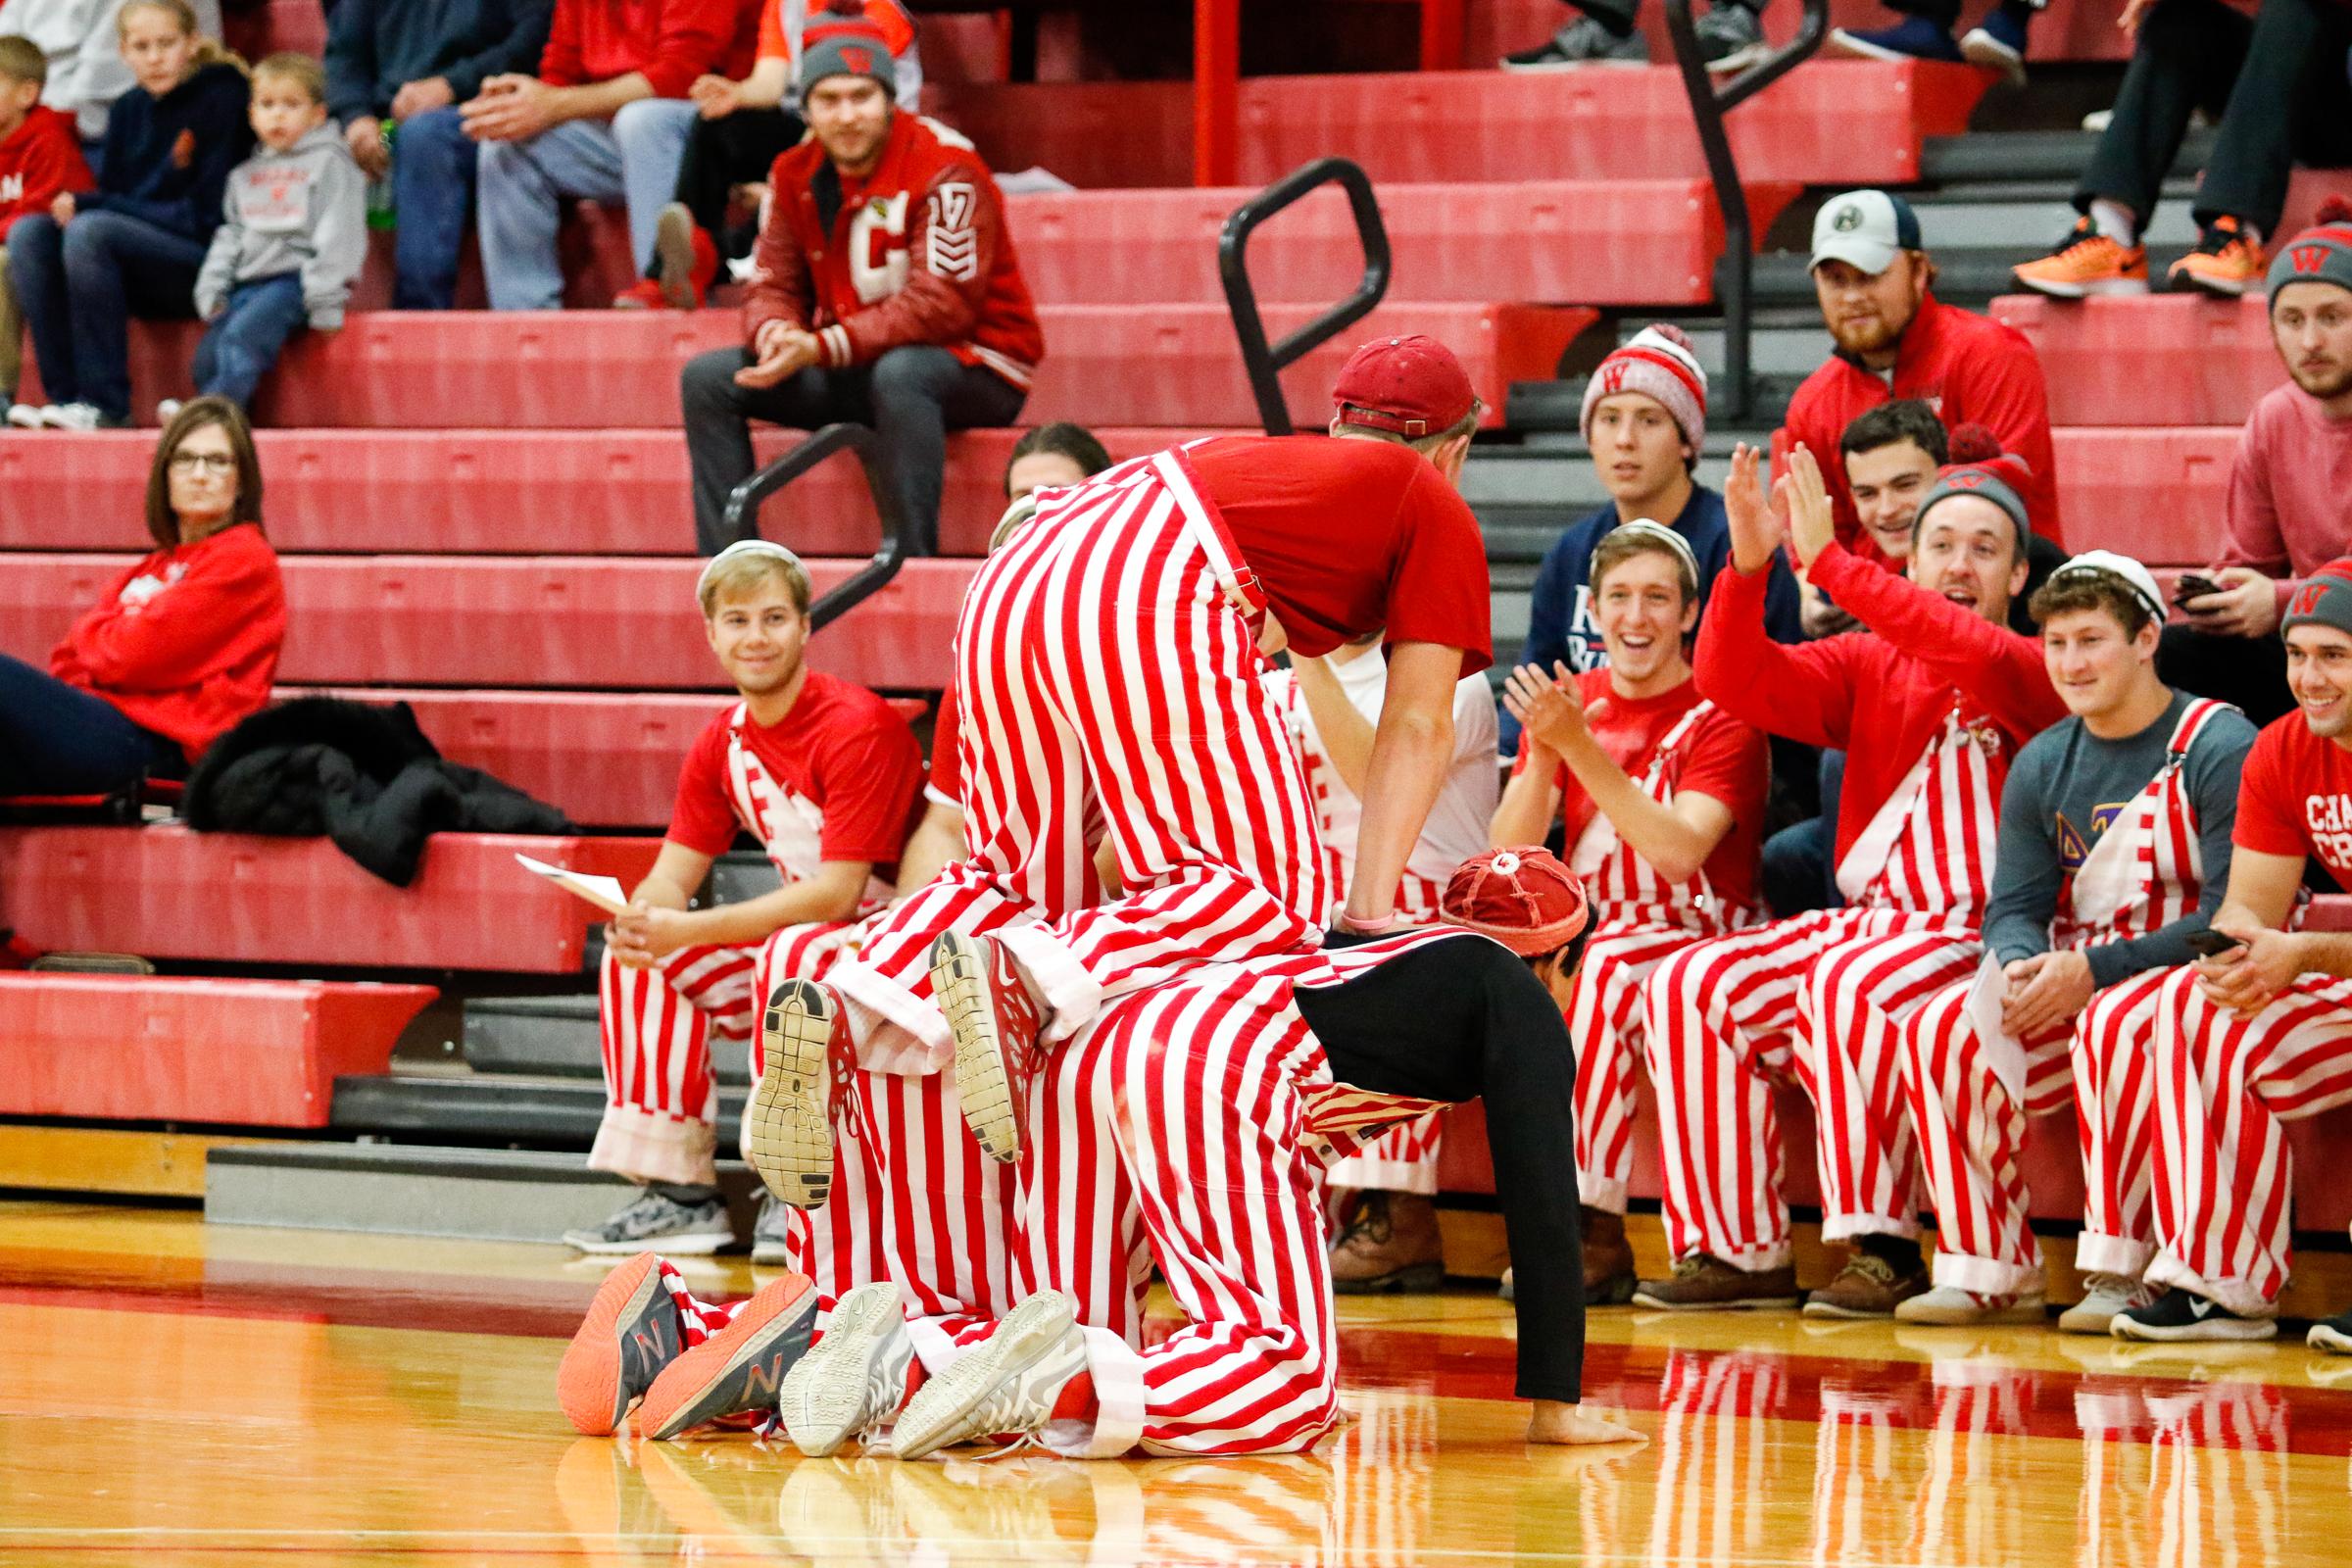 Photo Album: Basketball vs. Wooster - Extras